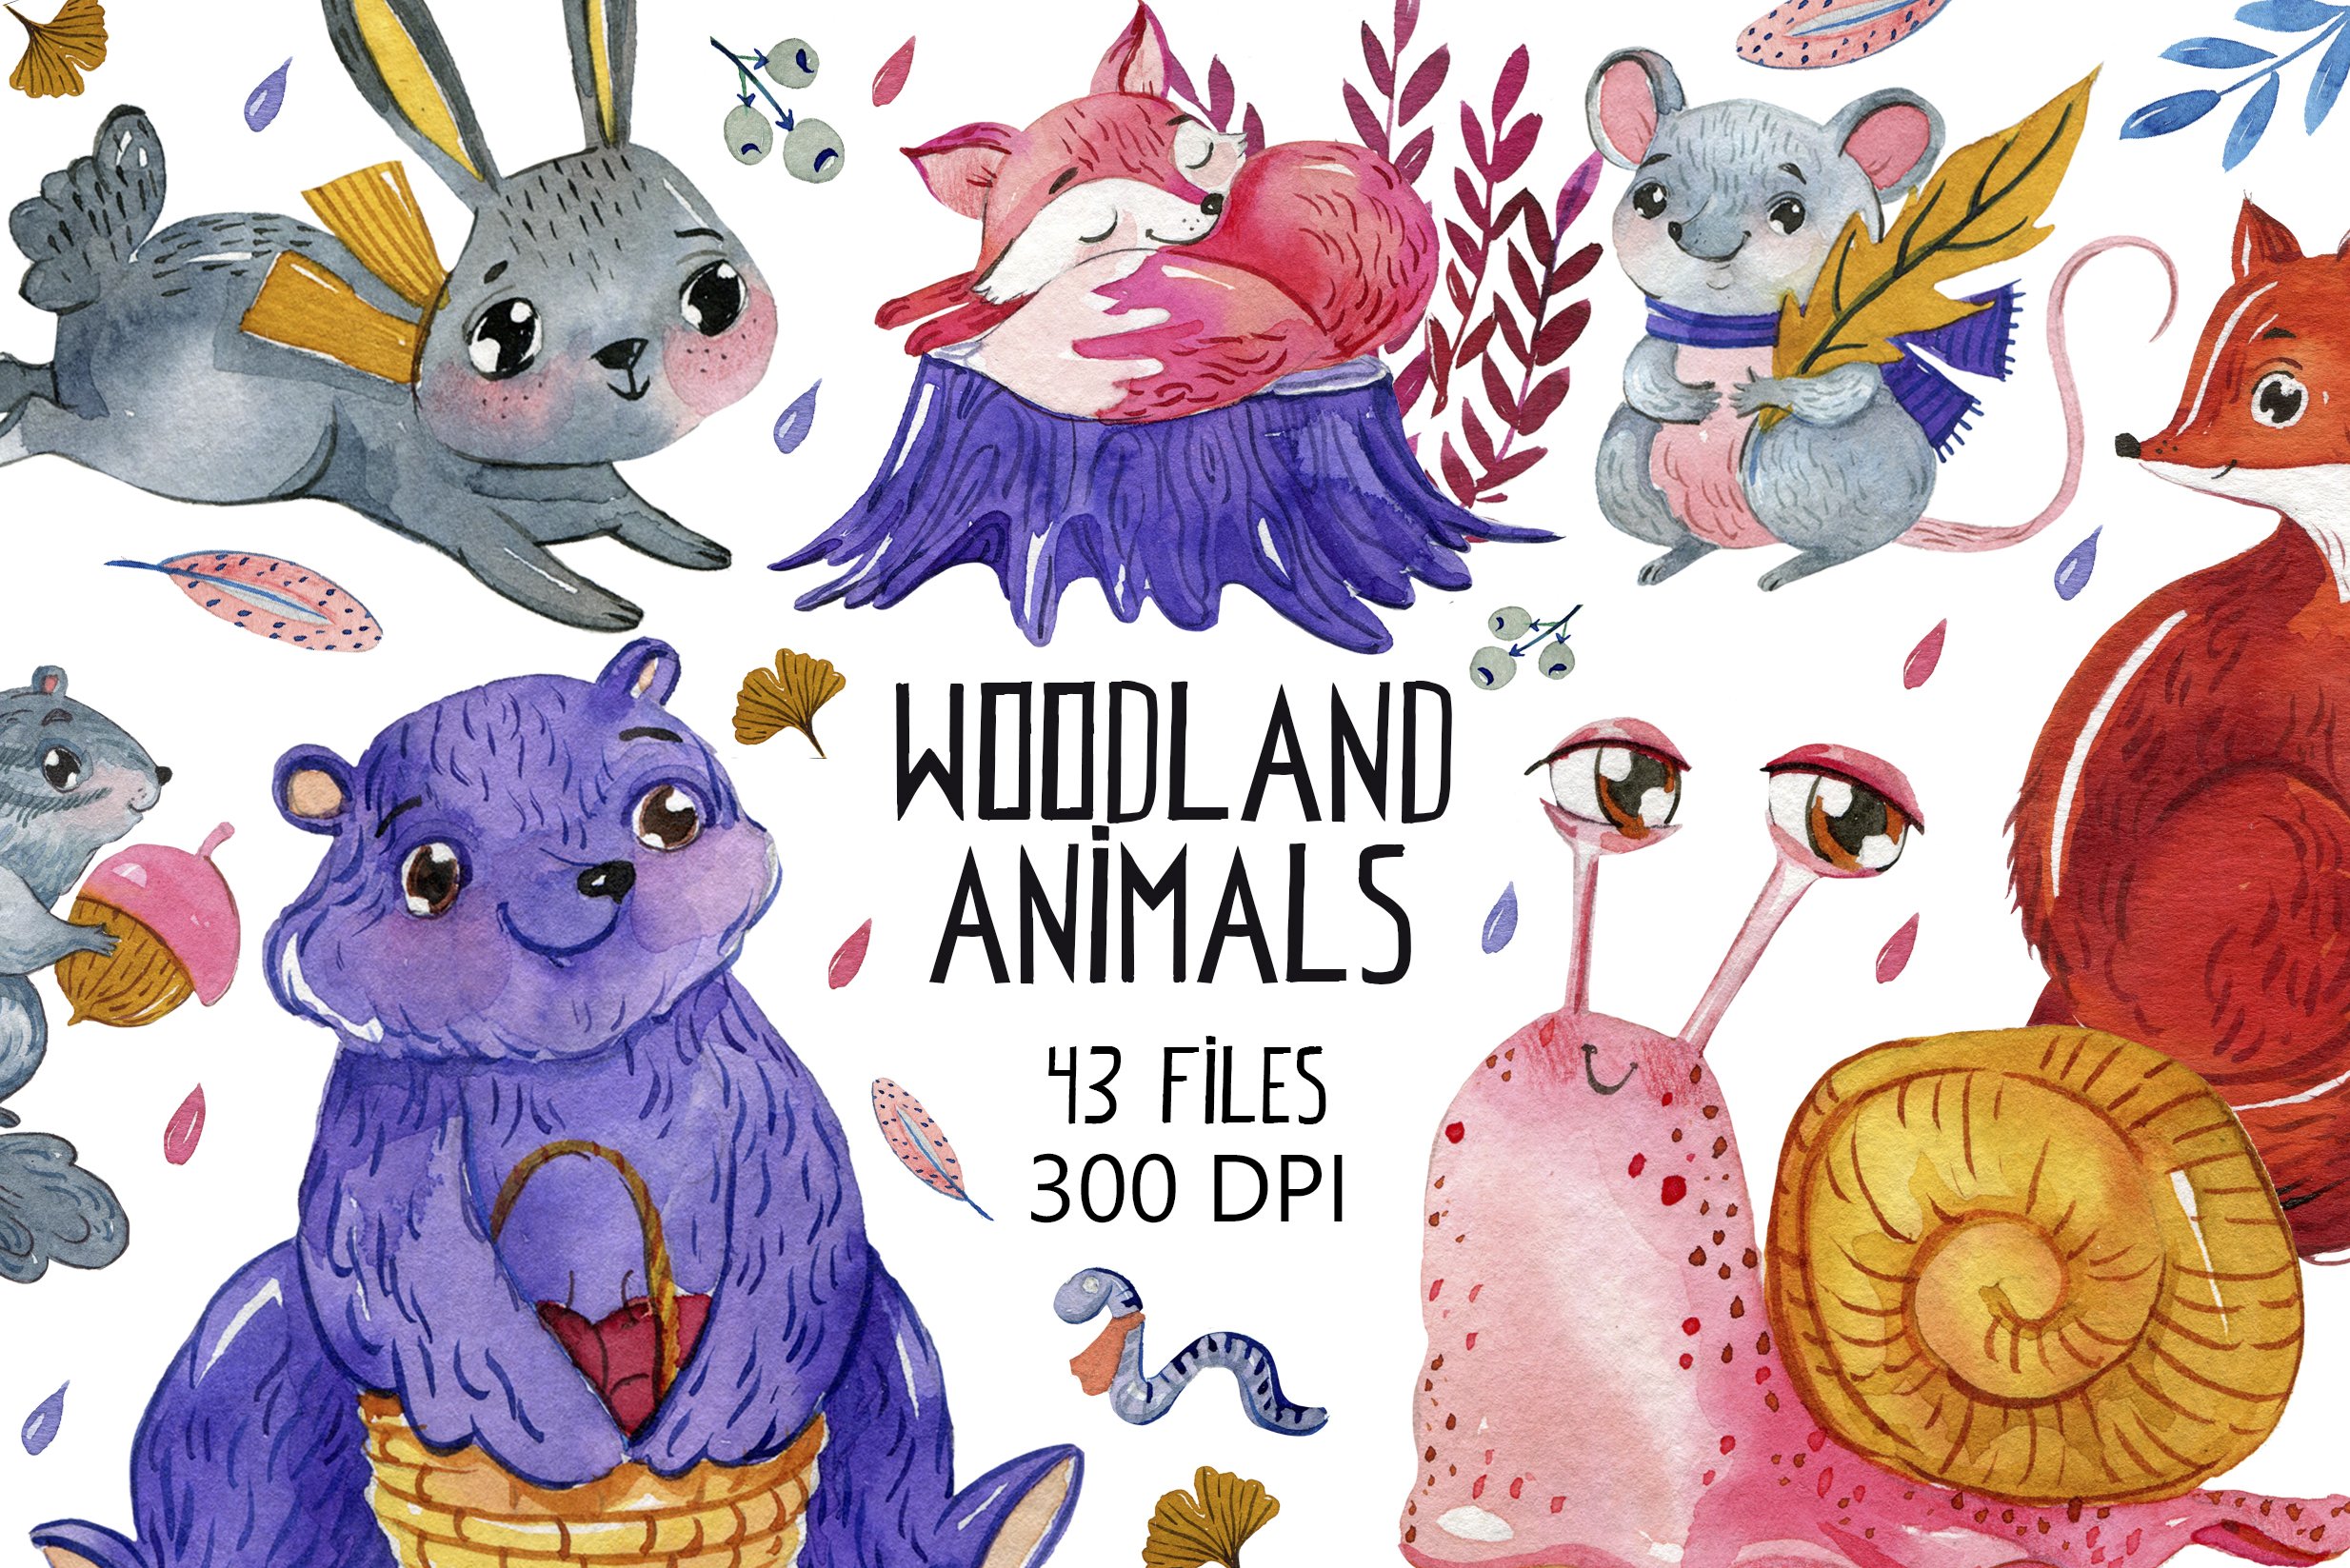 Woodland animals clipart cover image.